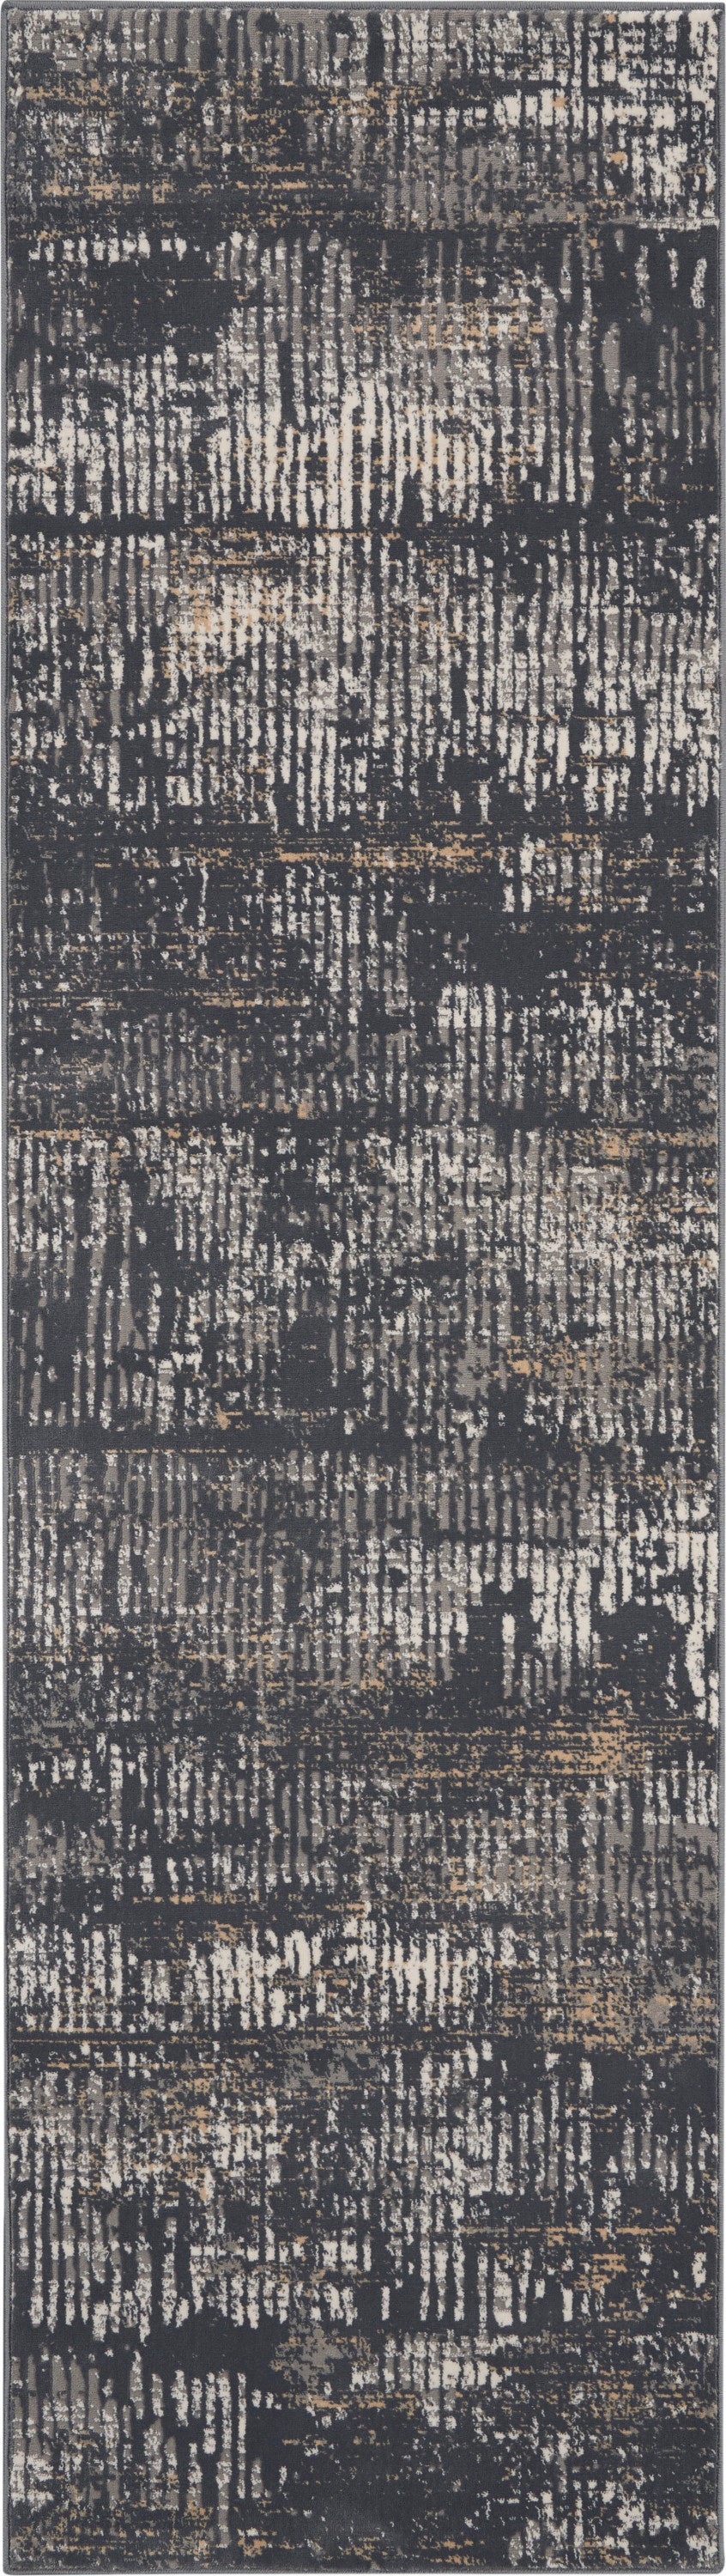 Michael Amini MA90 Uptown UPT03 Charcoal Grey Contemporary Machinemade Rug